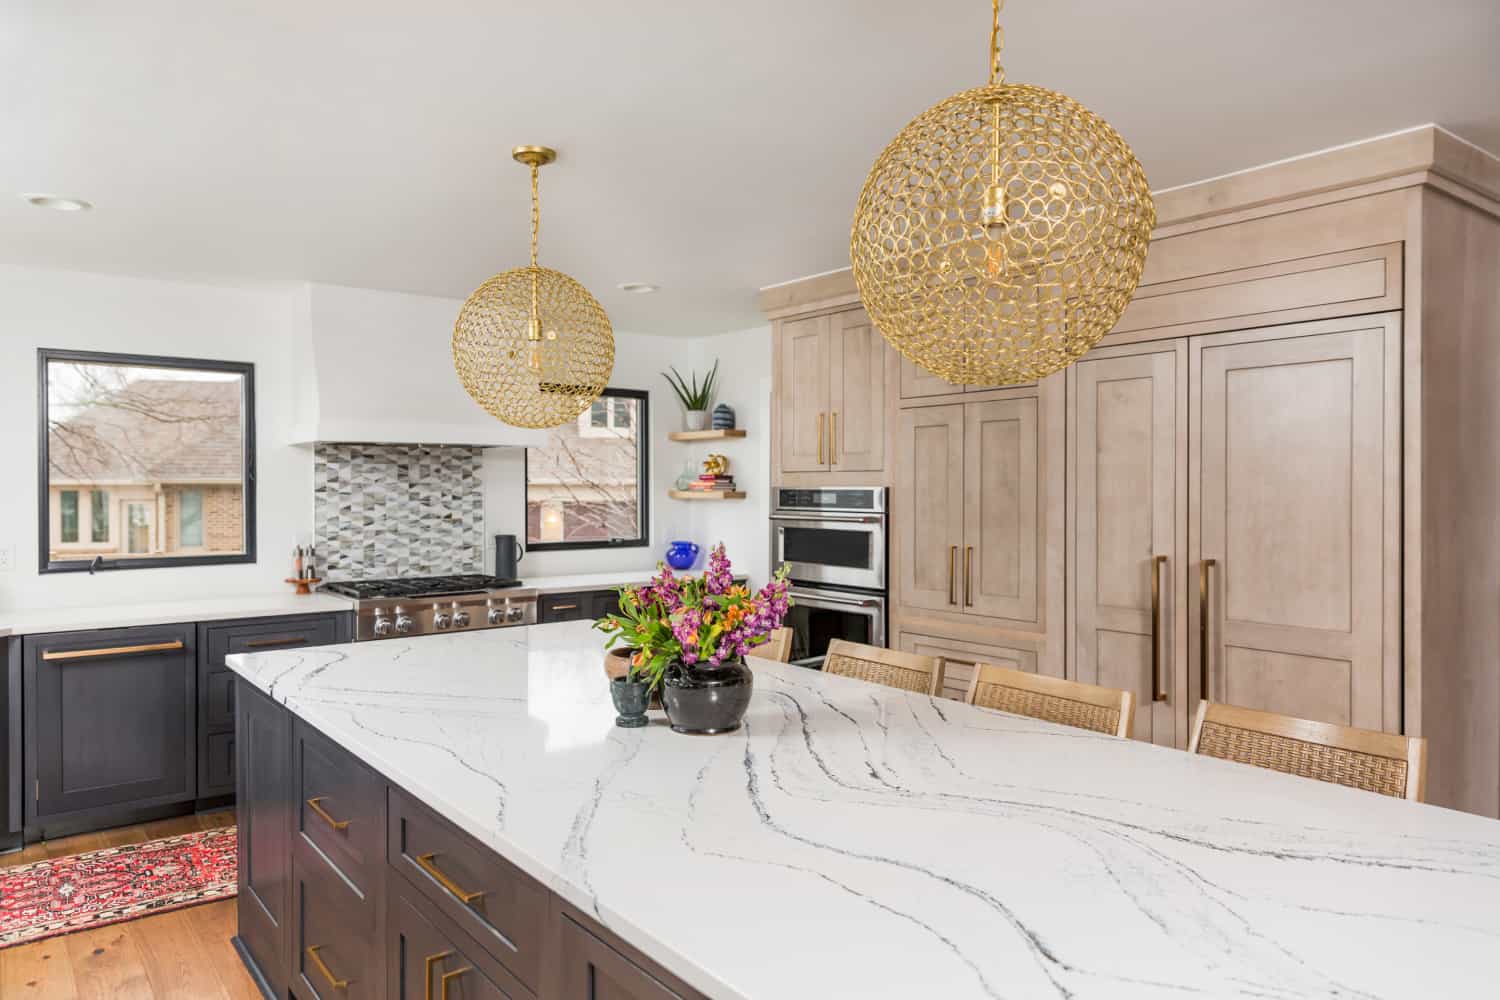 Nicholas Design Build | A remodeled kitchen with marble counter tops and gold pendant lights.